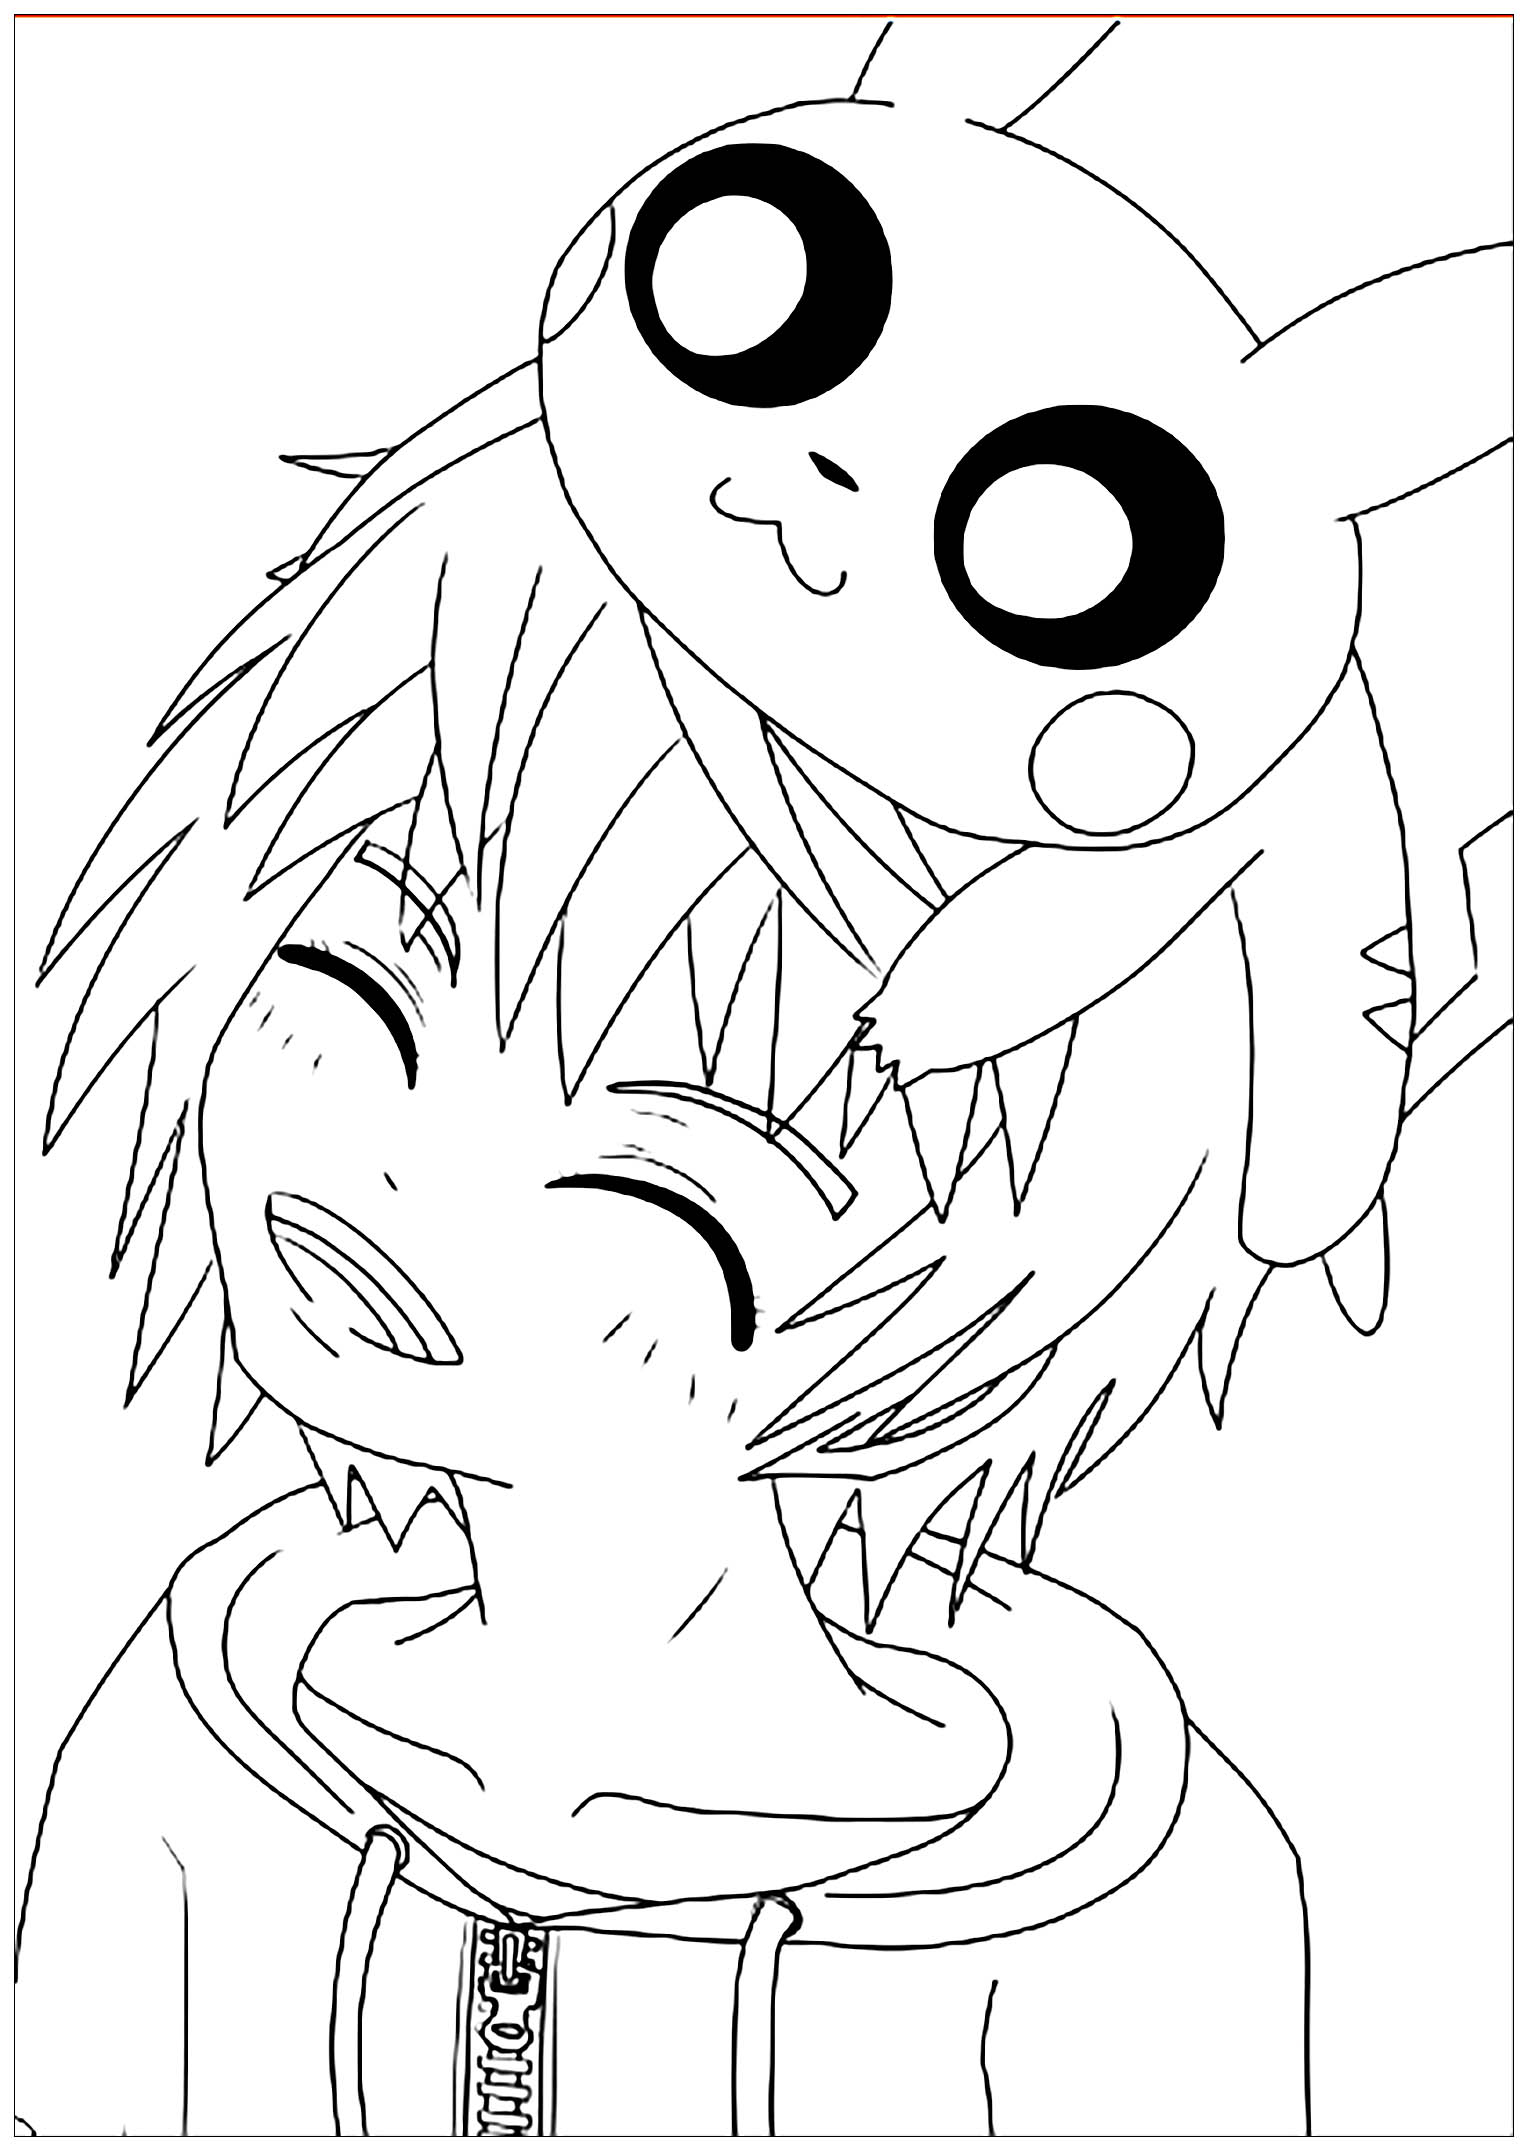 Kawaii To Download For Free Kawaii Kids Coloring Pages